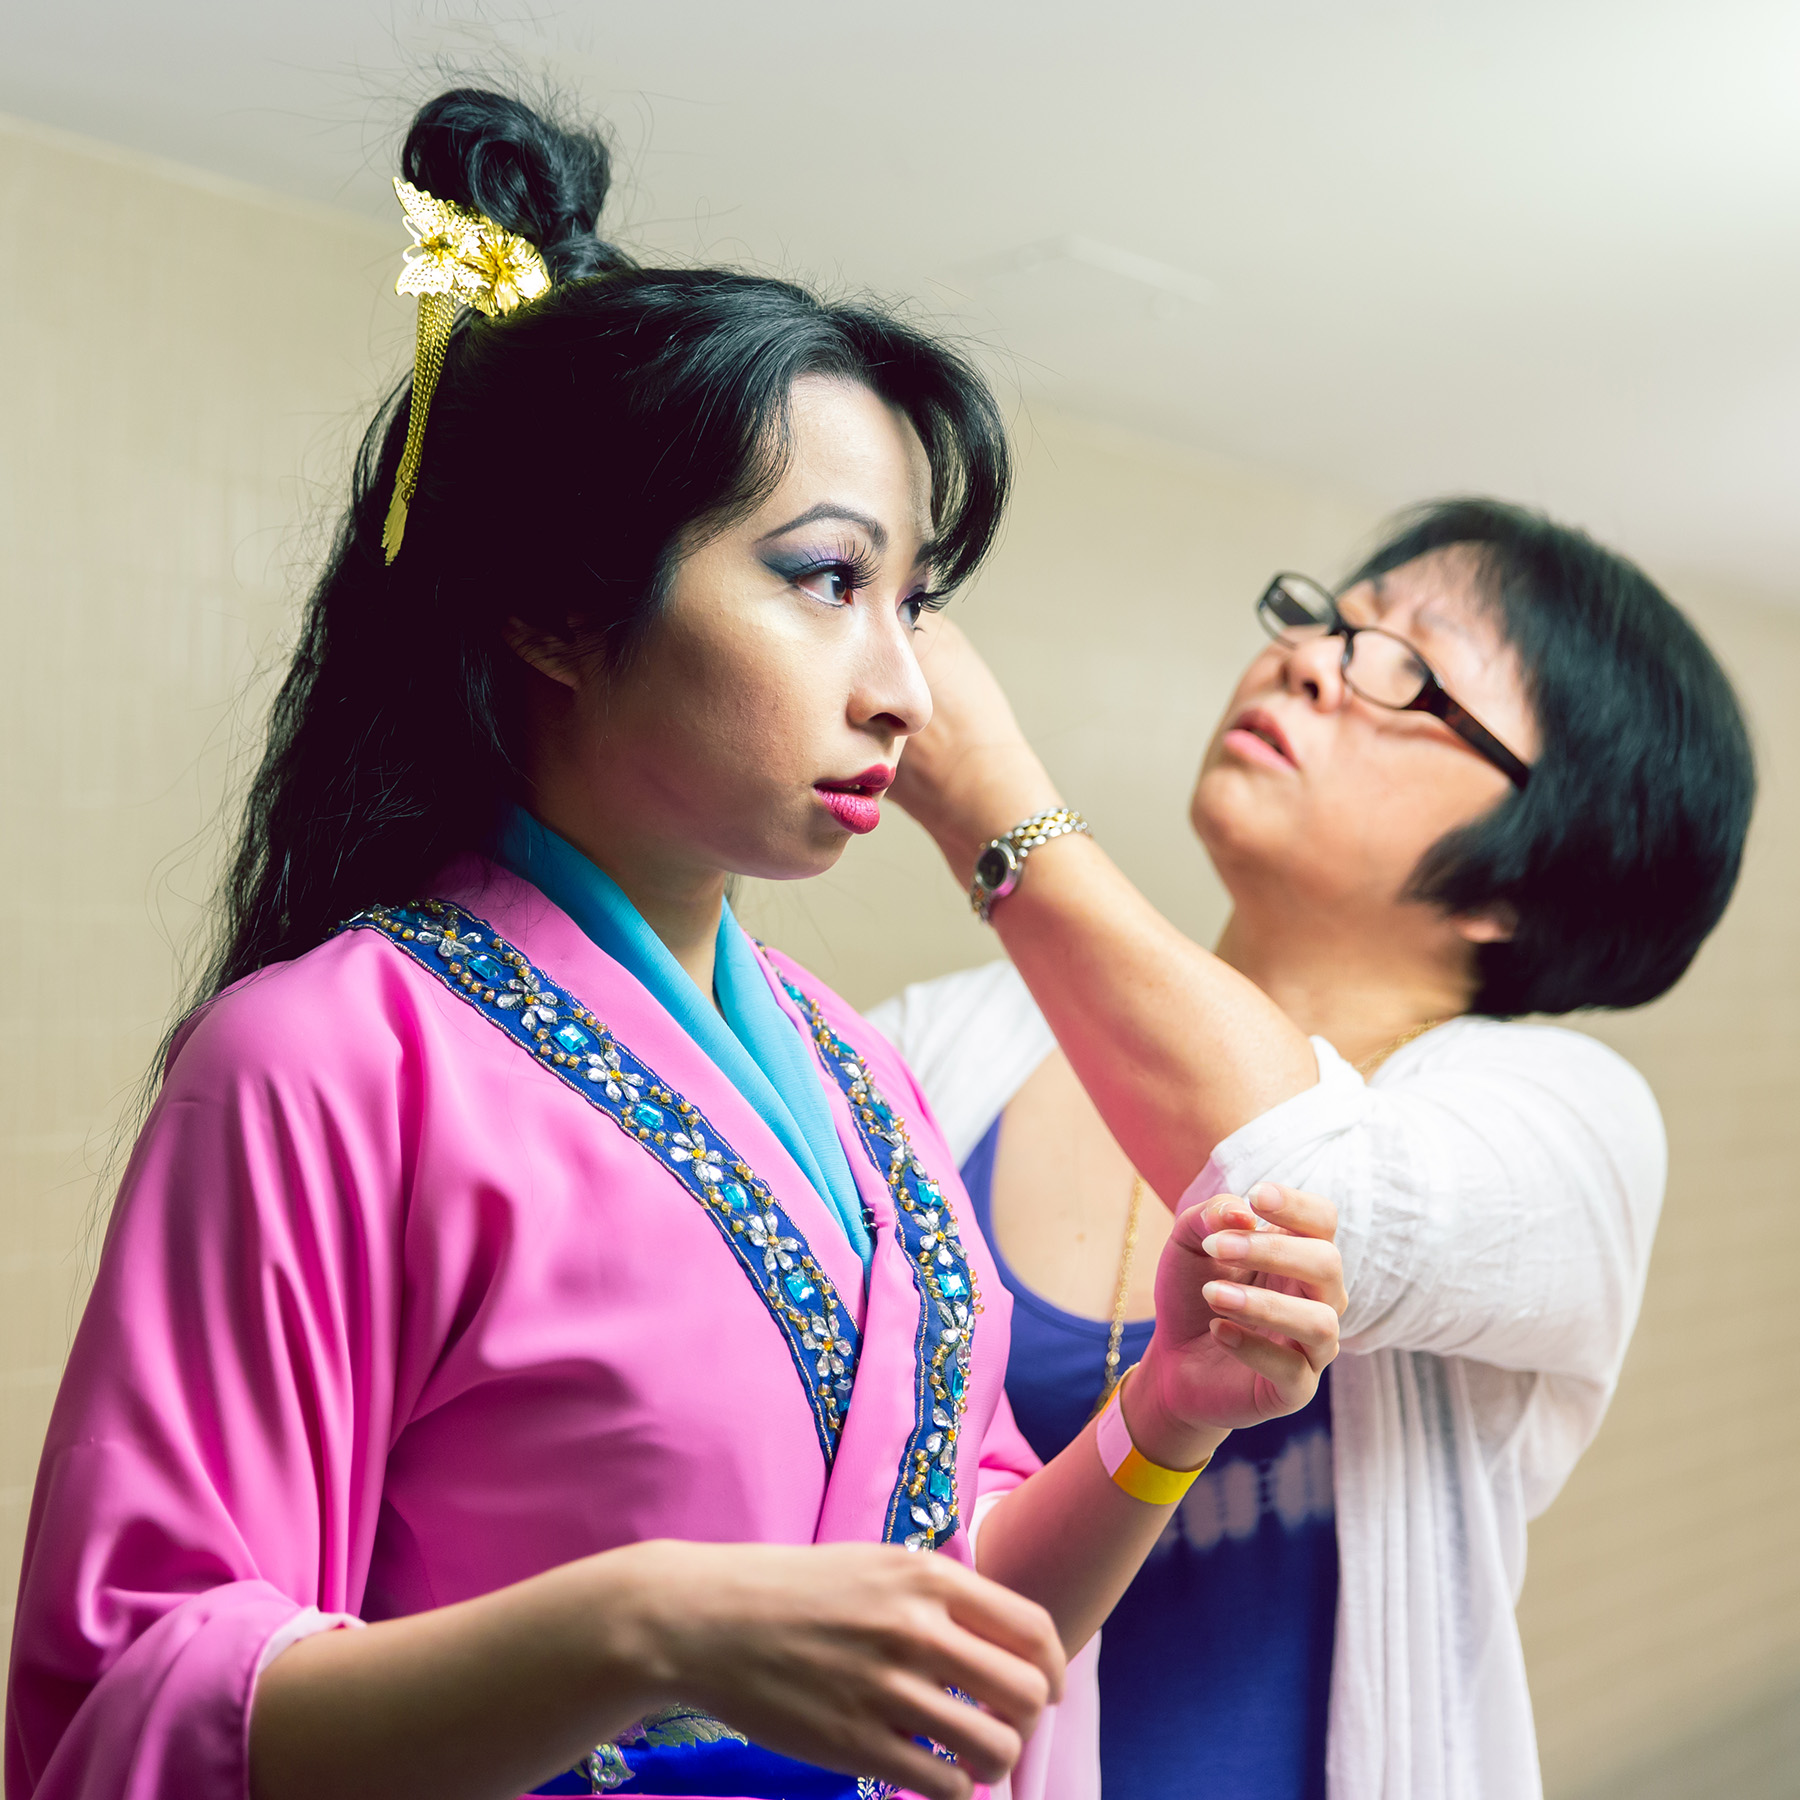 A young Asian Canadian woman dressed in a traditional Chinese outfit of pink and blue is standing still in the foreground. Behind her, a middle-aged Asian Canadian woman in casual clothing has her hands uplifted, carefully working on the first woman's intricate traditional updo, inserting golden filigree pins into it.